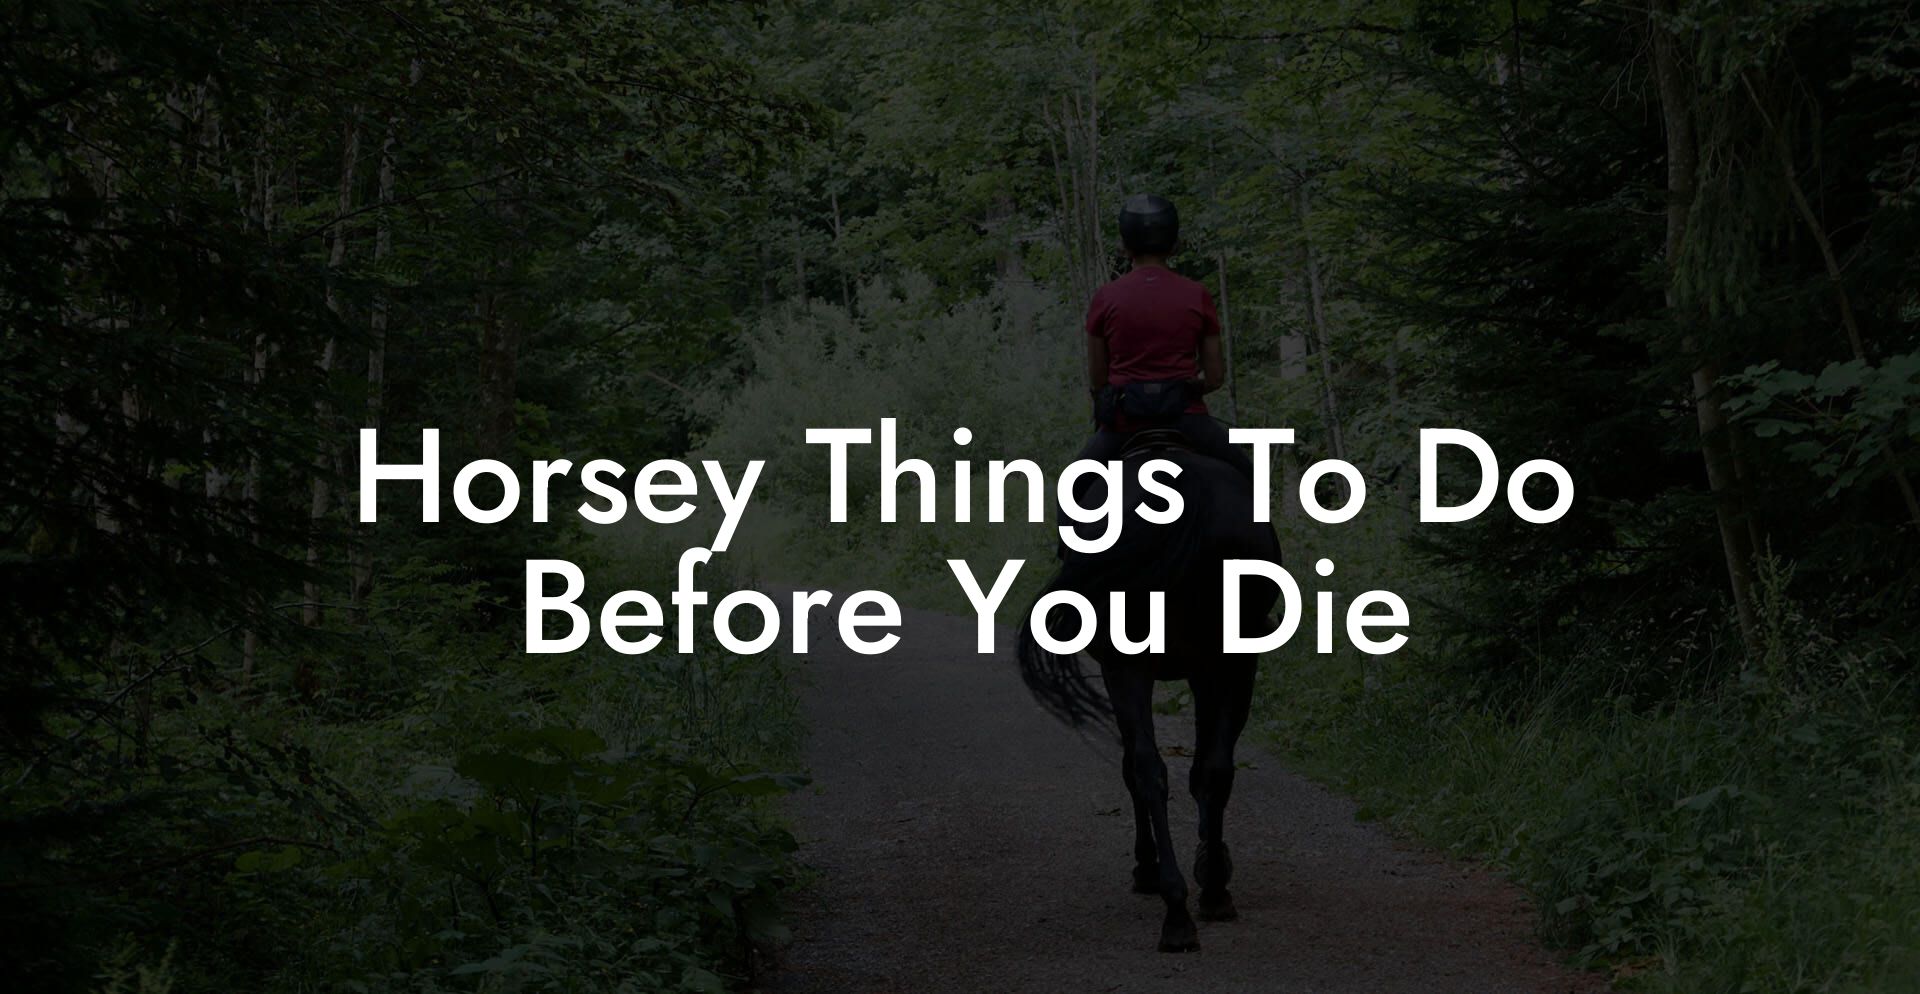 Horsey Things To Do Before You Die